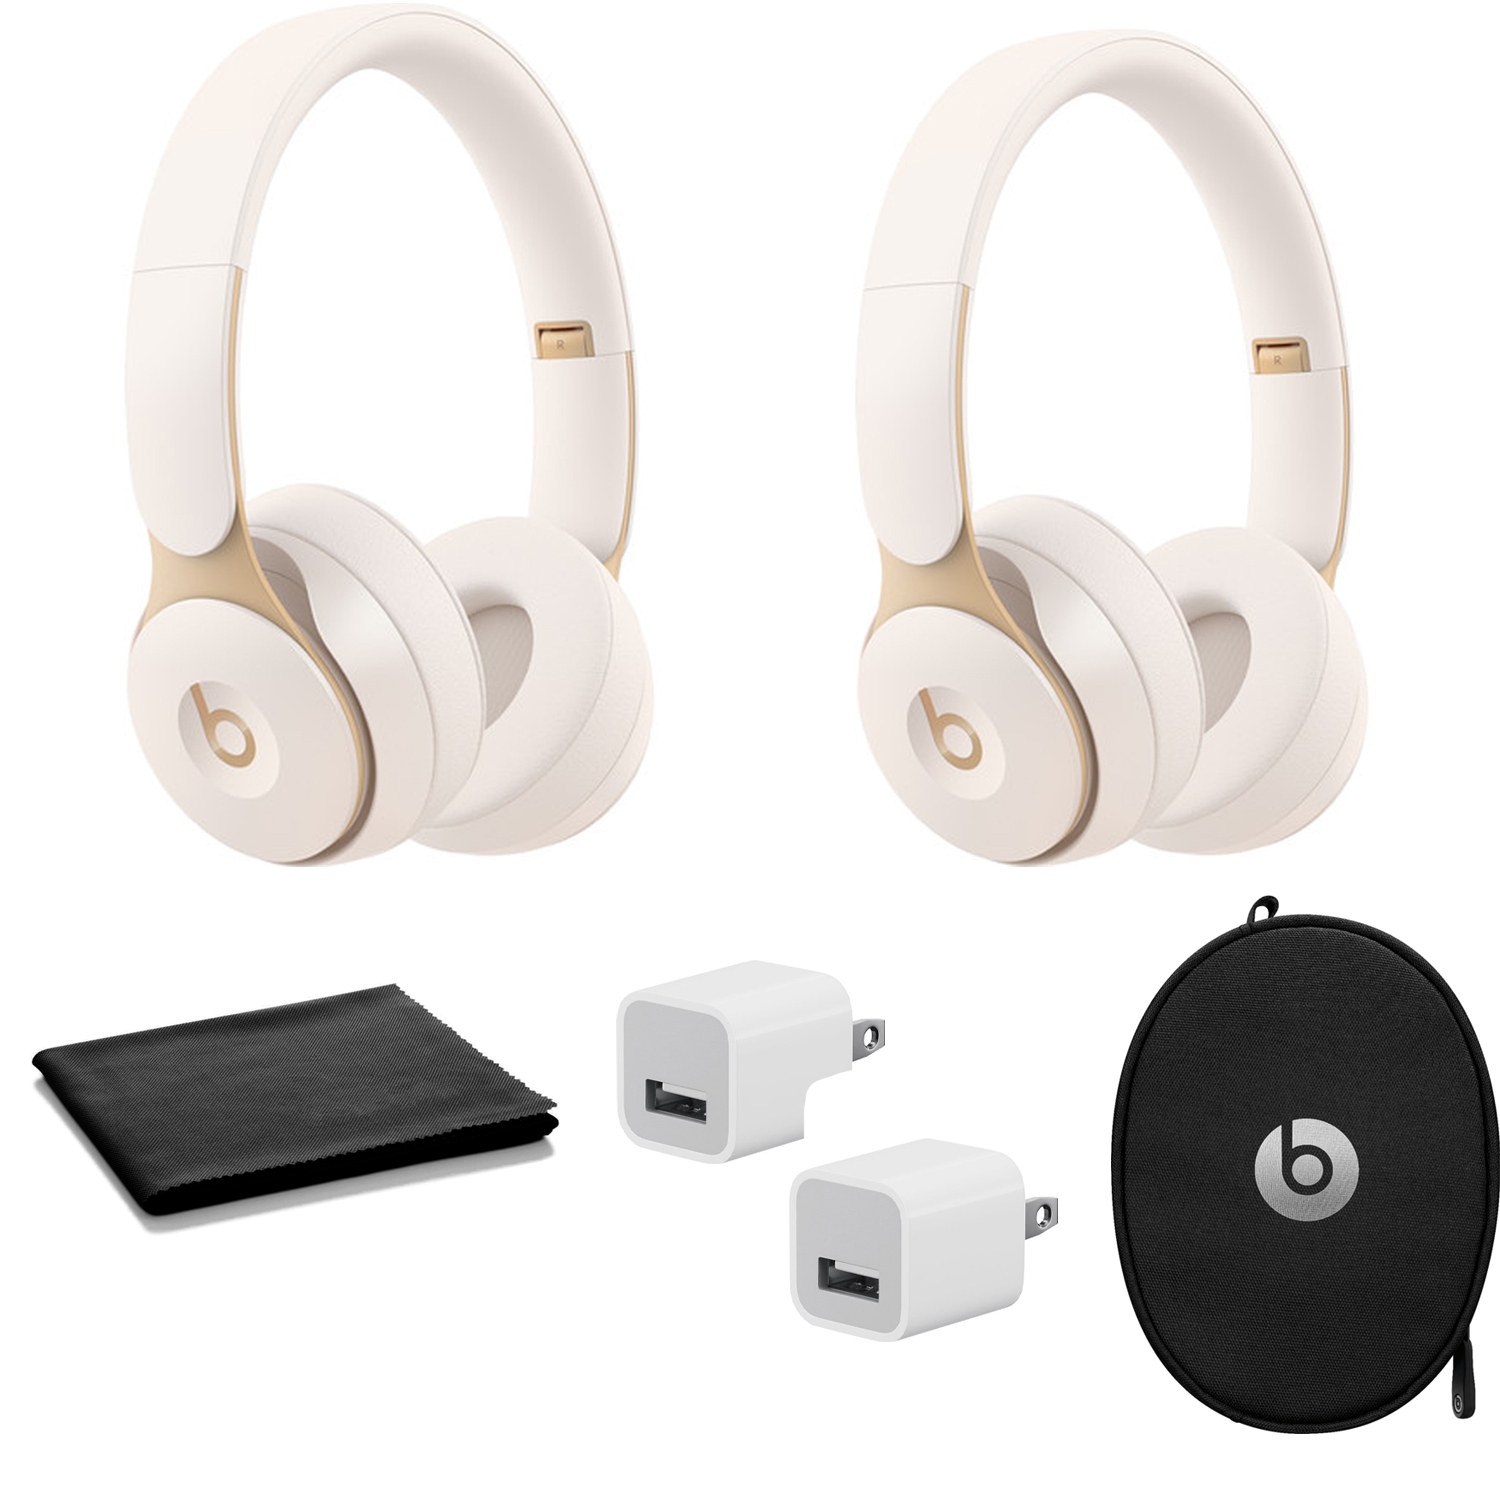 Beats Solo Pro Wireless Noise-Canceling Headphones (Ivory) (2 Pack) with USB adapter